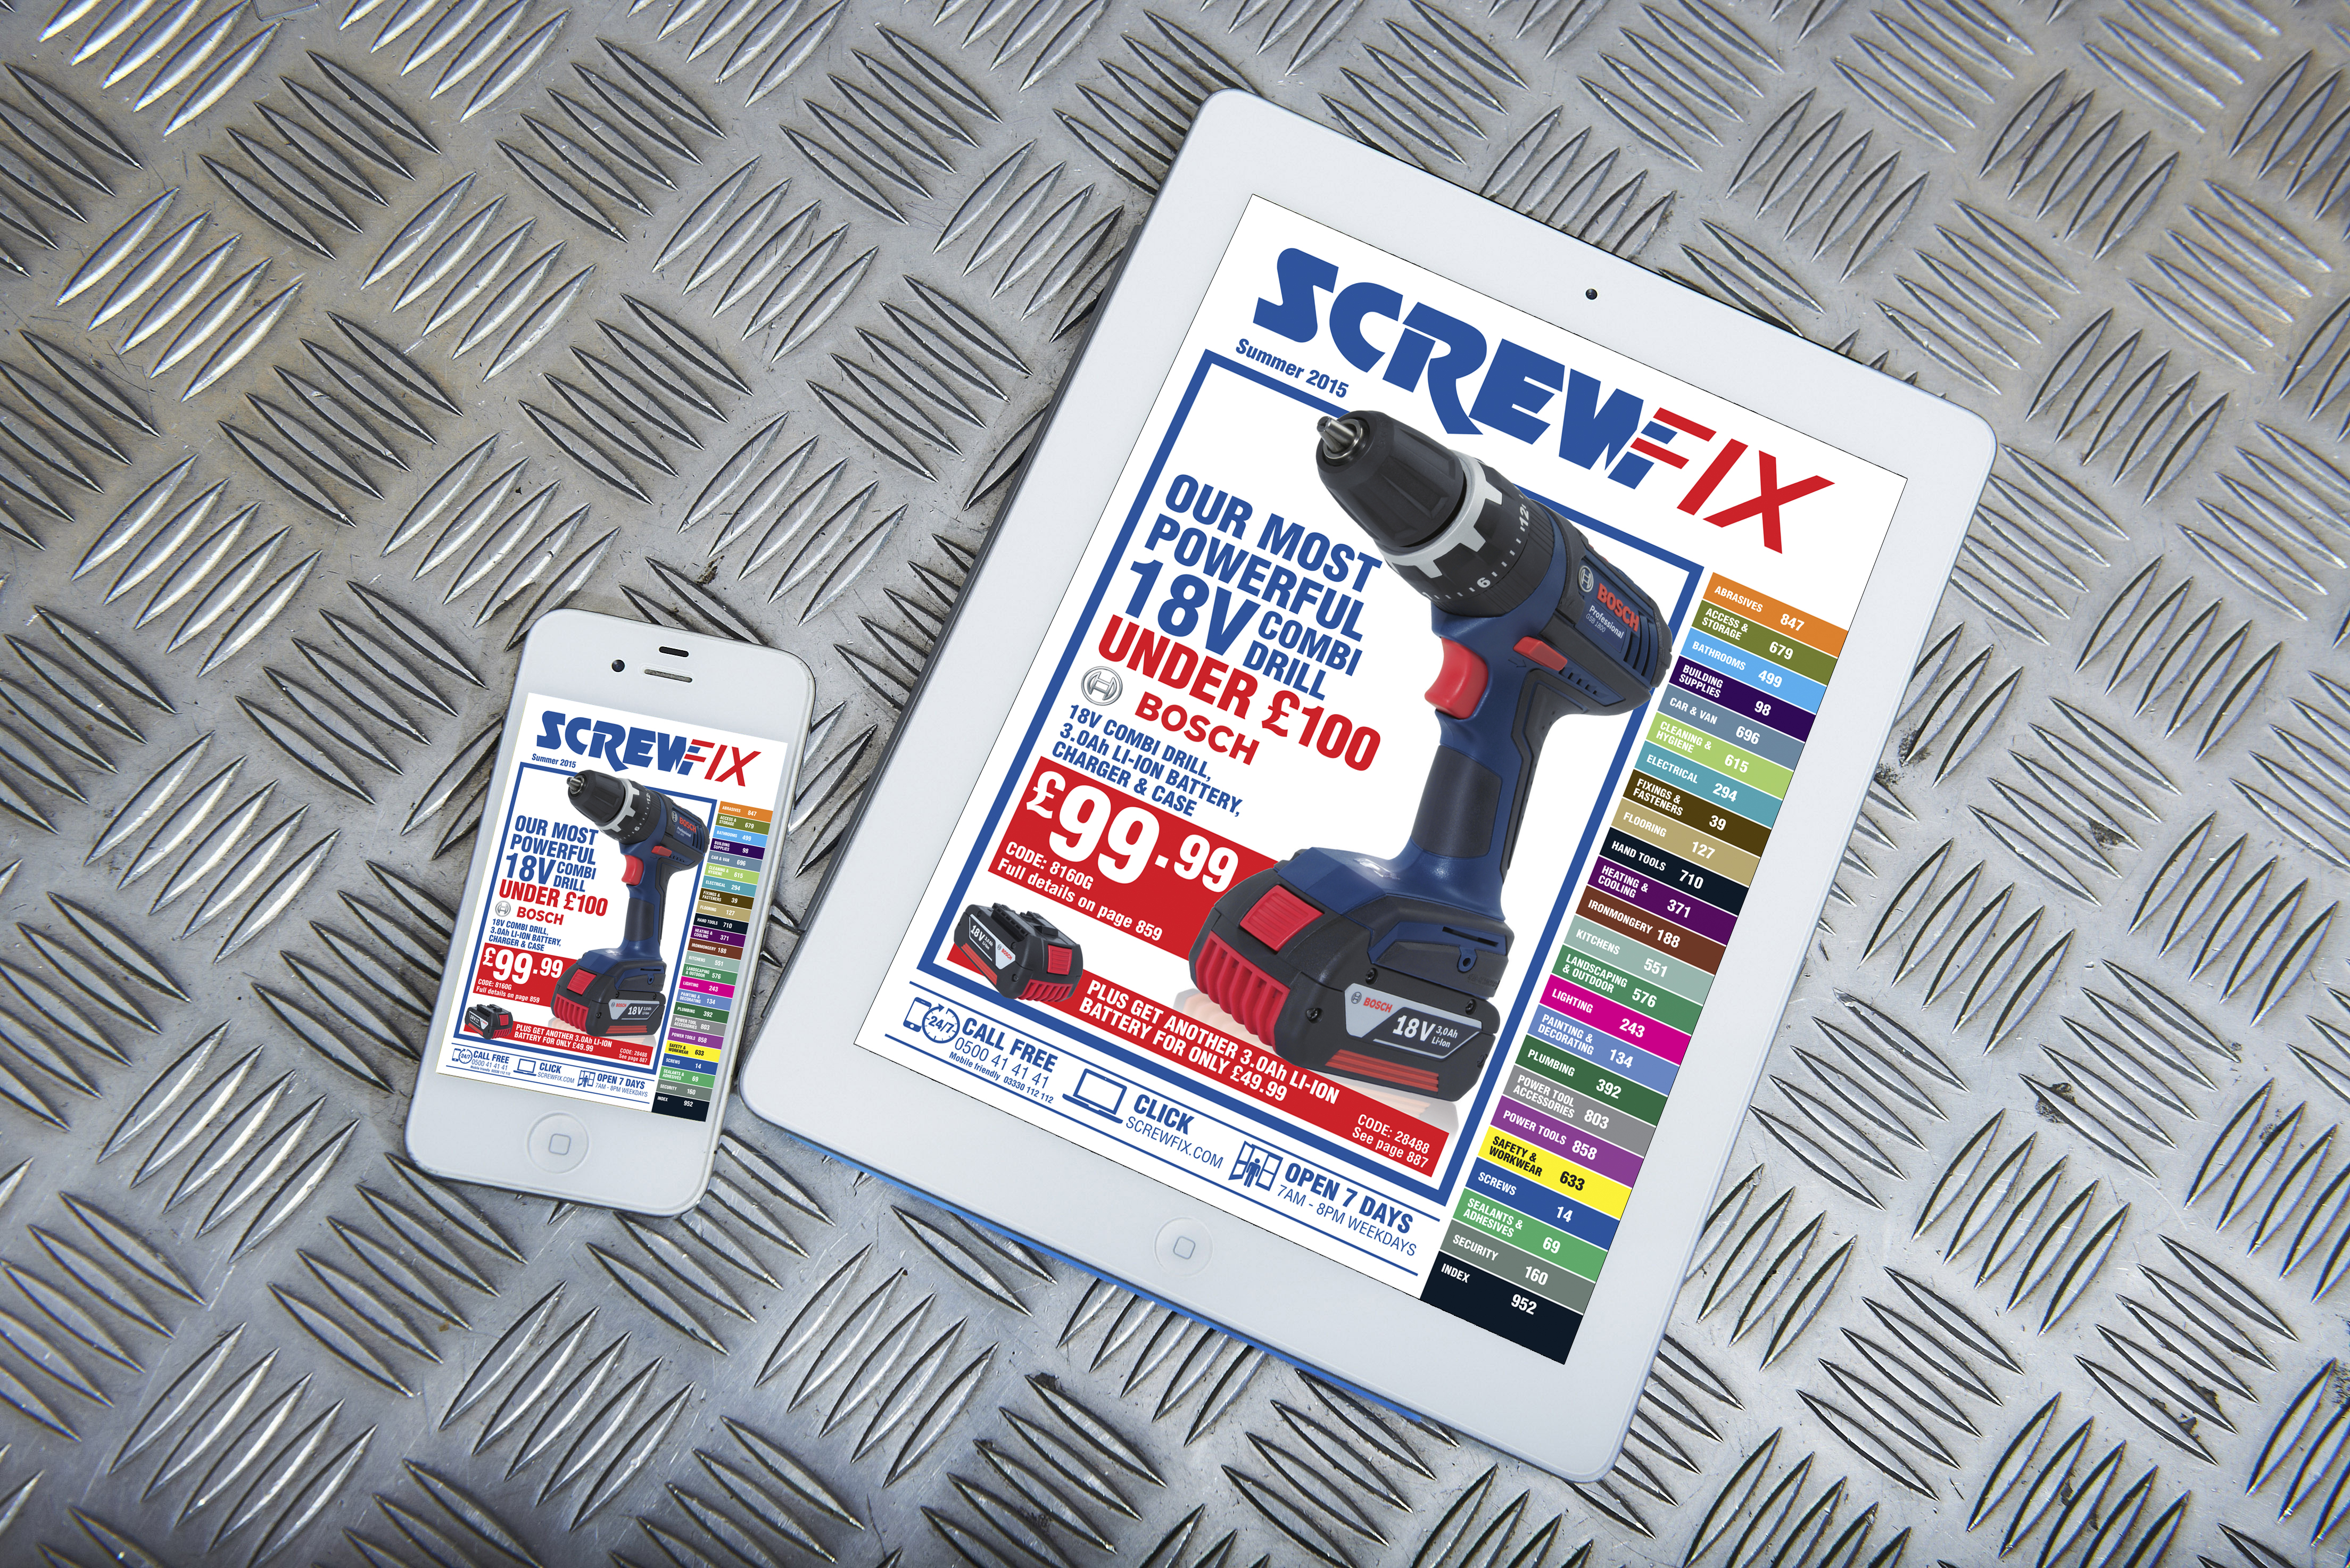 Powered up: Exclusive power tools from Screwfix